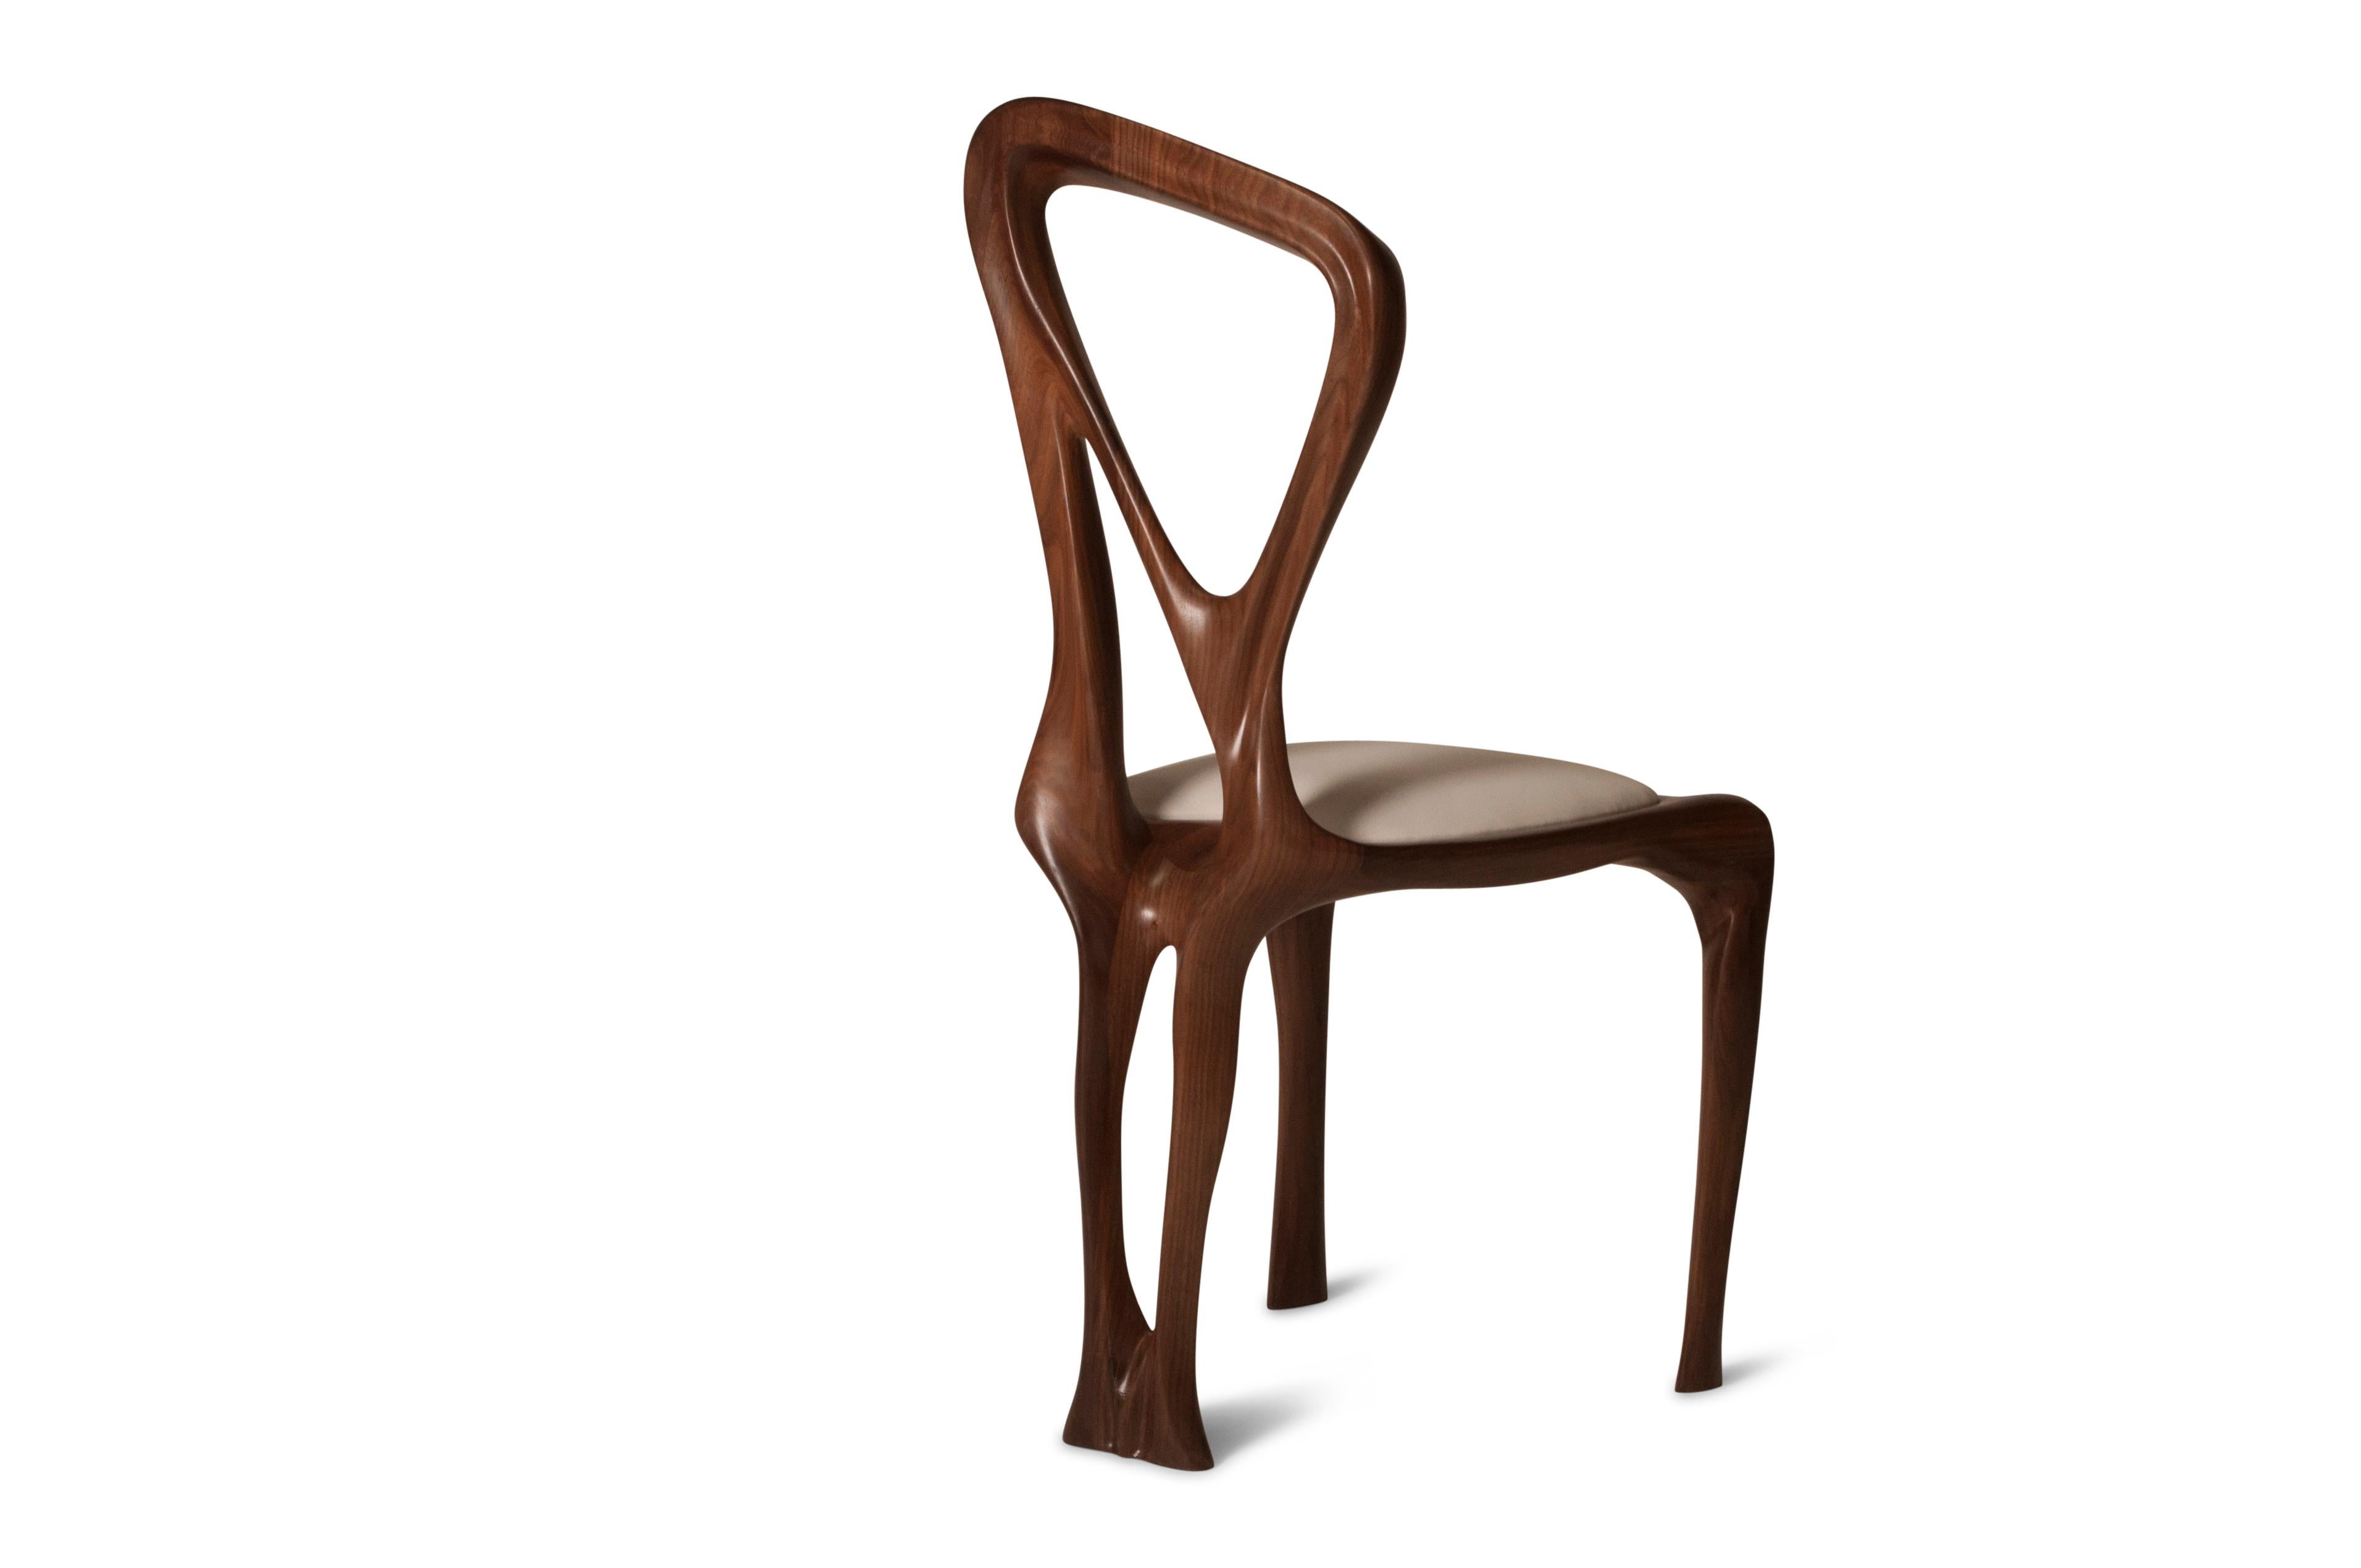 Dining chair designed by Amorph made out of solid ashwood. It is stained ebony.
Dimension: 38